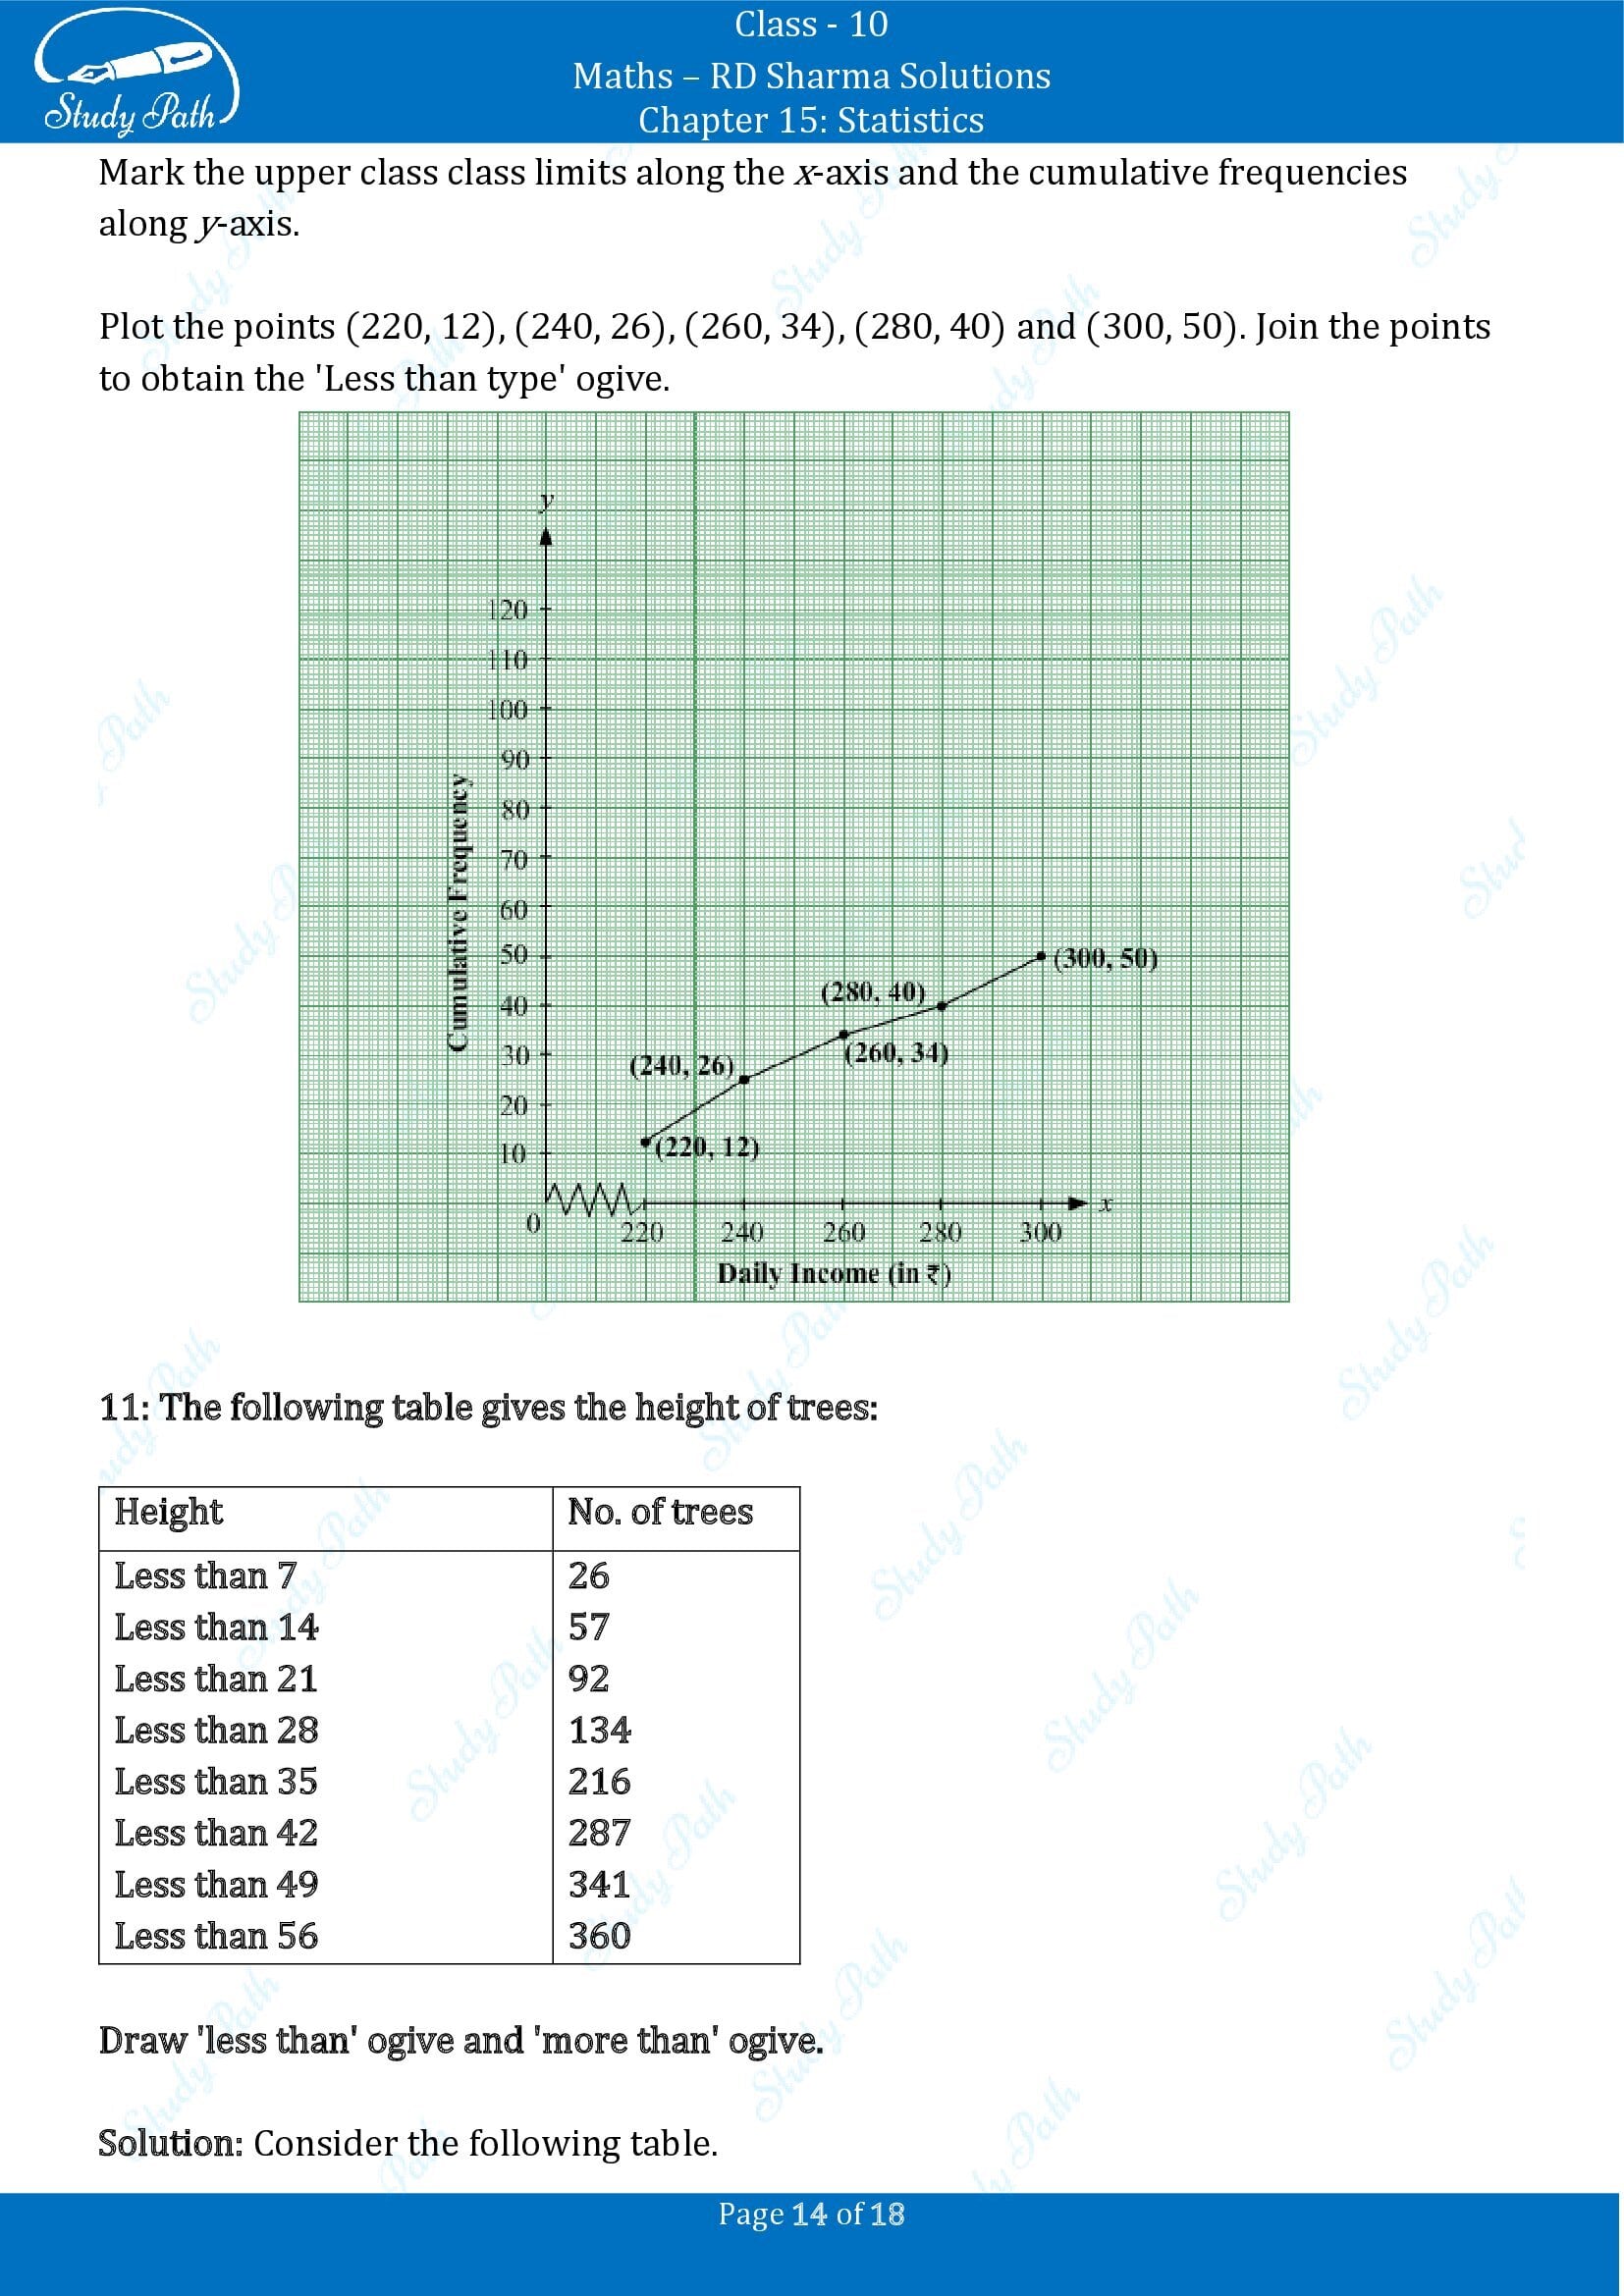 RD Sharma Solutions Class 10 Chapter 15 Statistics Exercise 15.6 00014